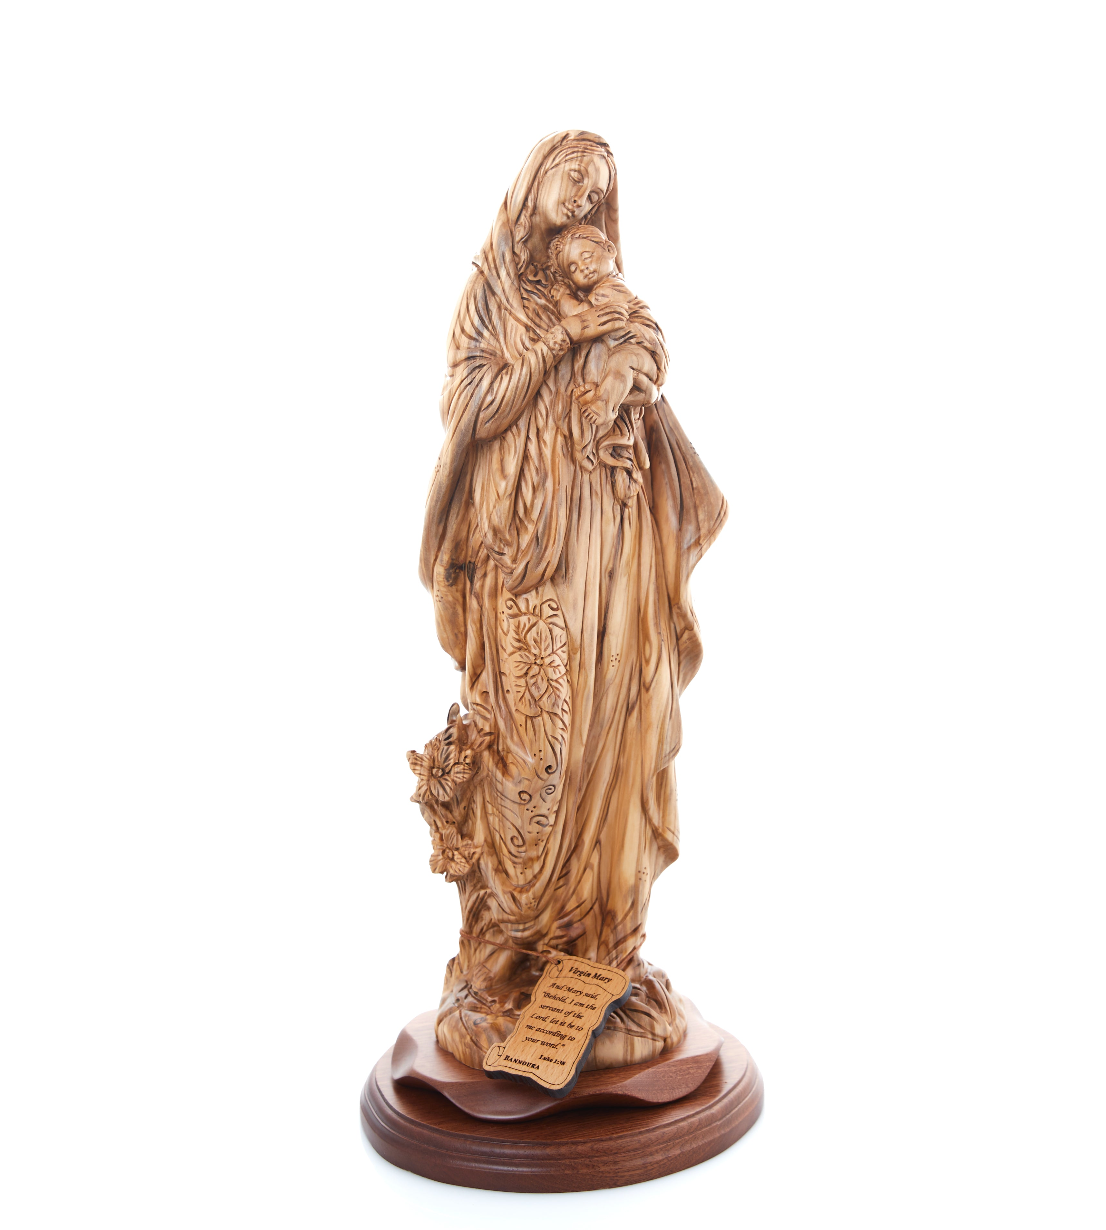 Virgin Mary holding Jesus Christ Sculpture, 17.3" Olive Wood from Holy Land